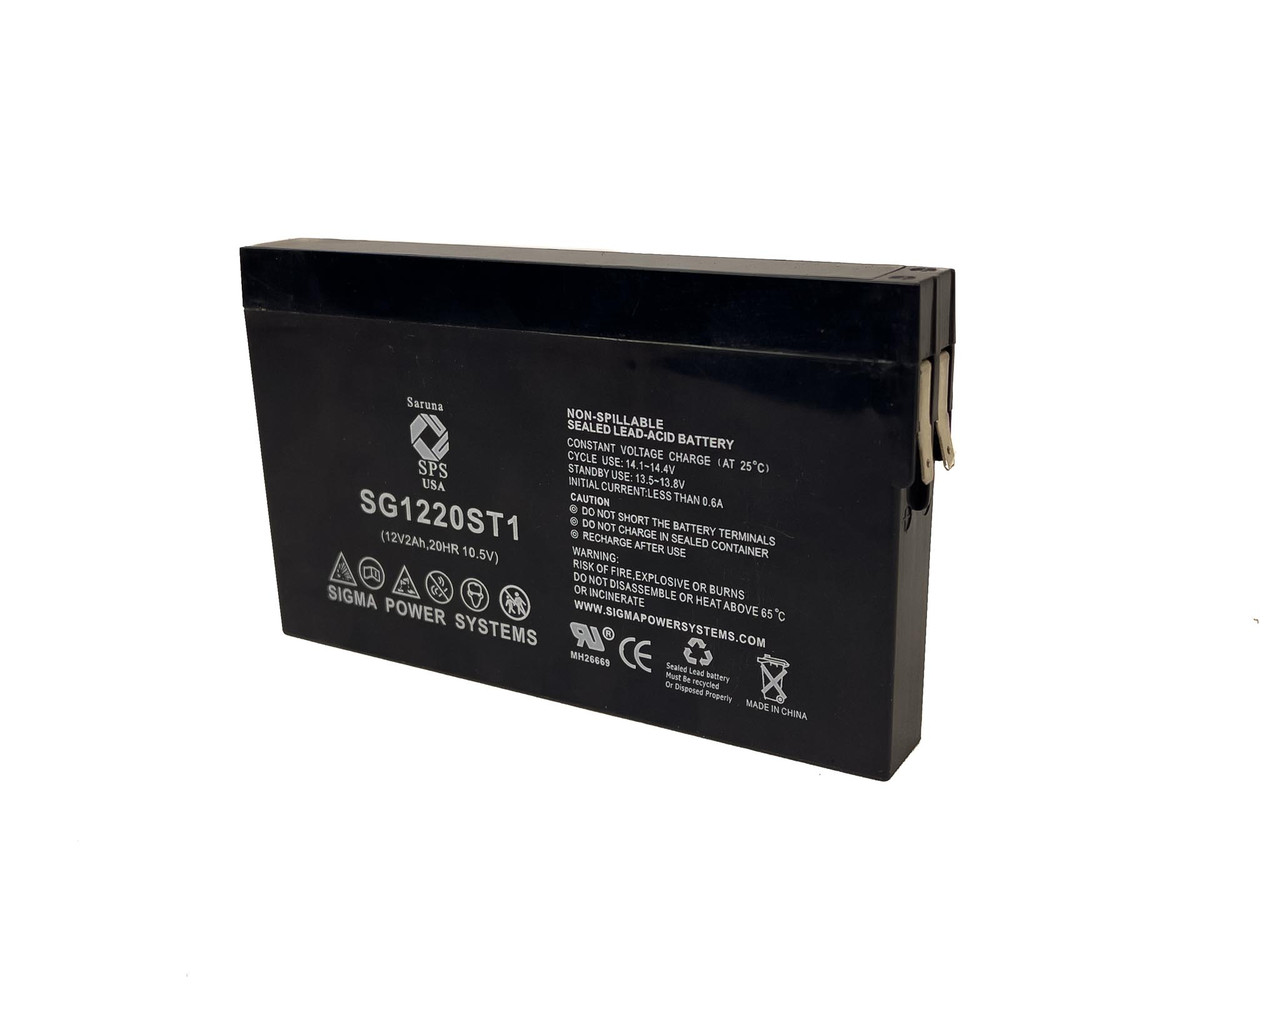 Raion Power 12V 2Ah Non-Spillable Replacement Rechargebale Battery for Litton ST501 Stats Scope